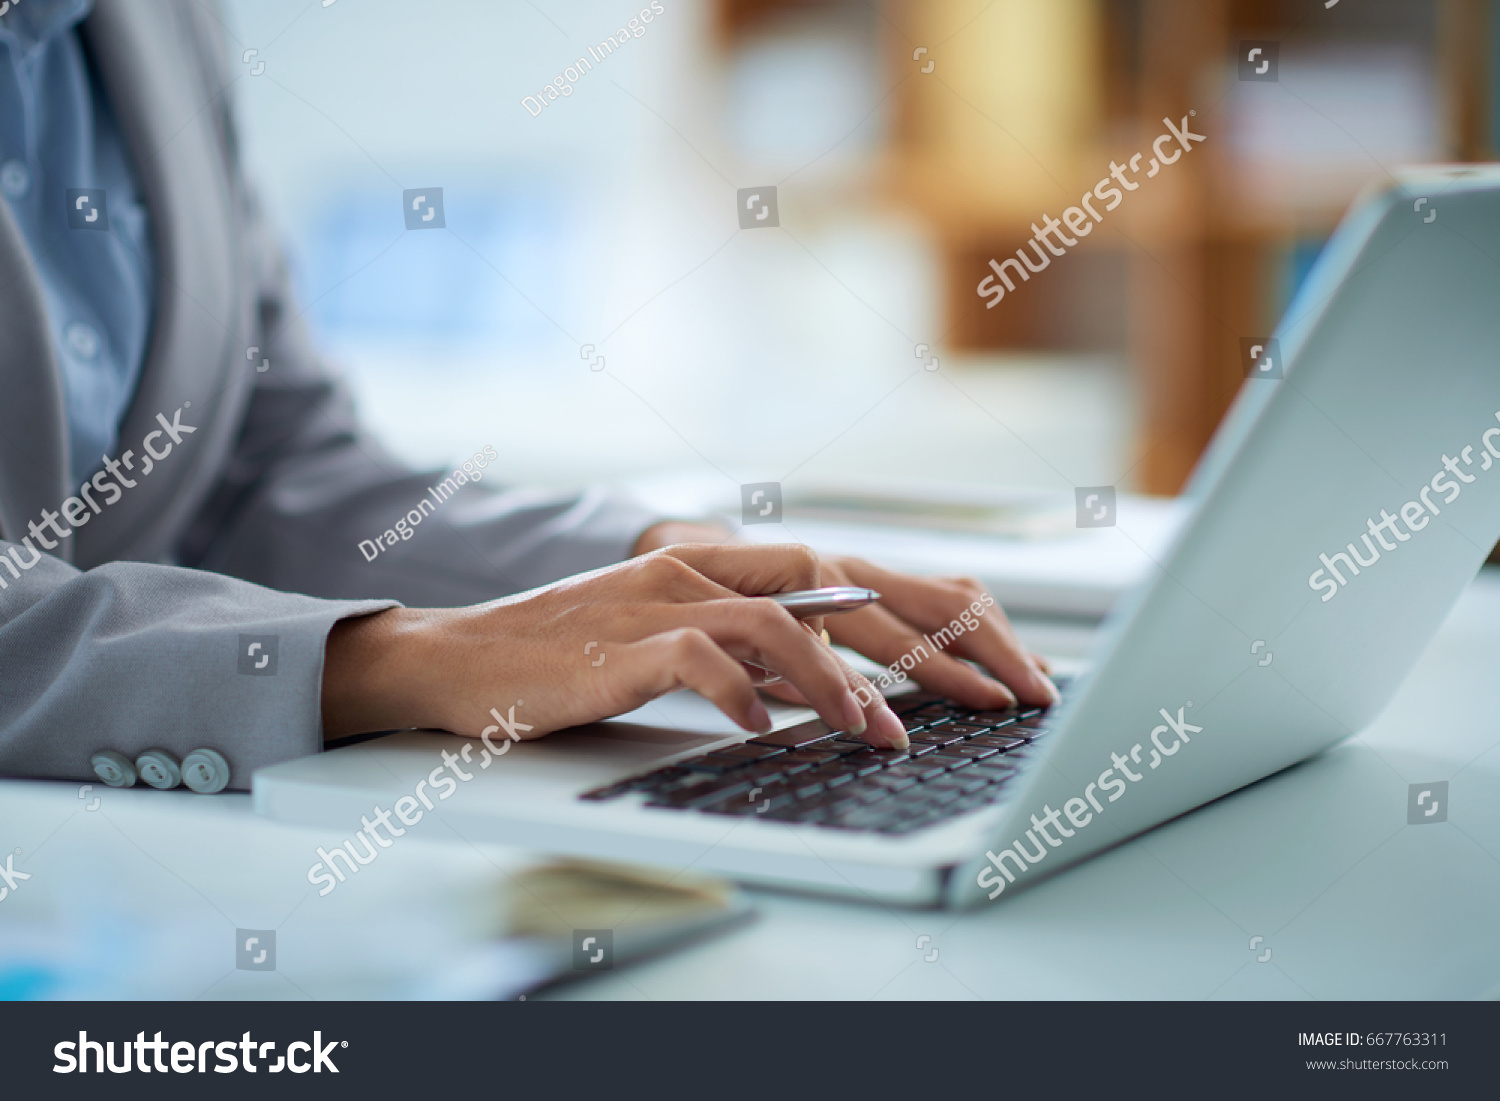 Hands of business lady working on laptop #667763311